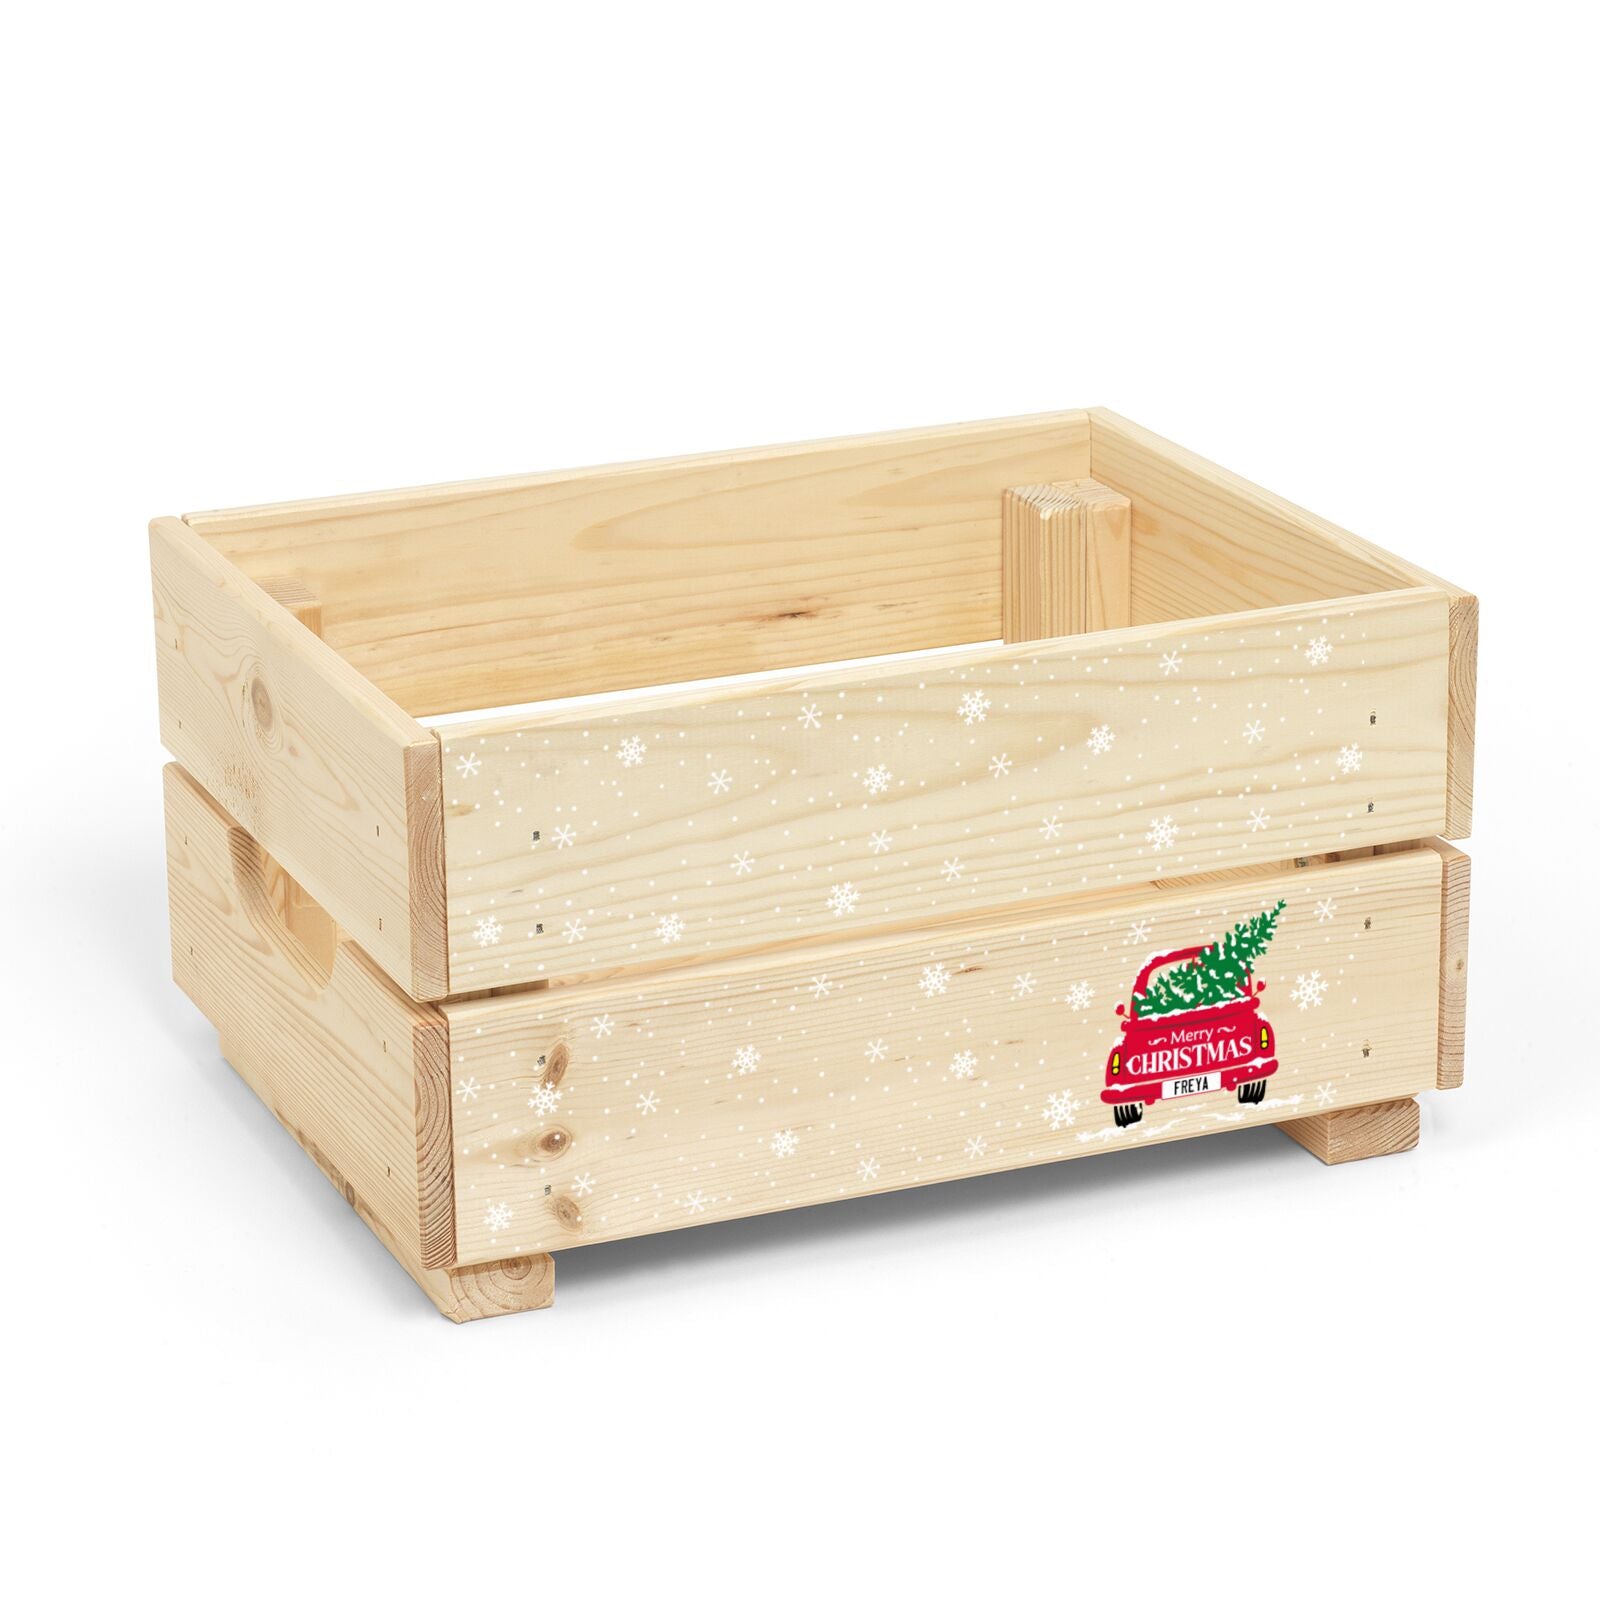 Personalised Driving Home For Christmas Christmas Eve Crate Box Side Angle